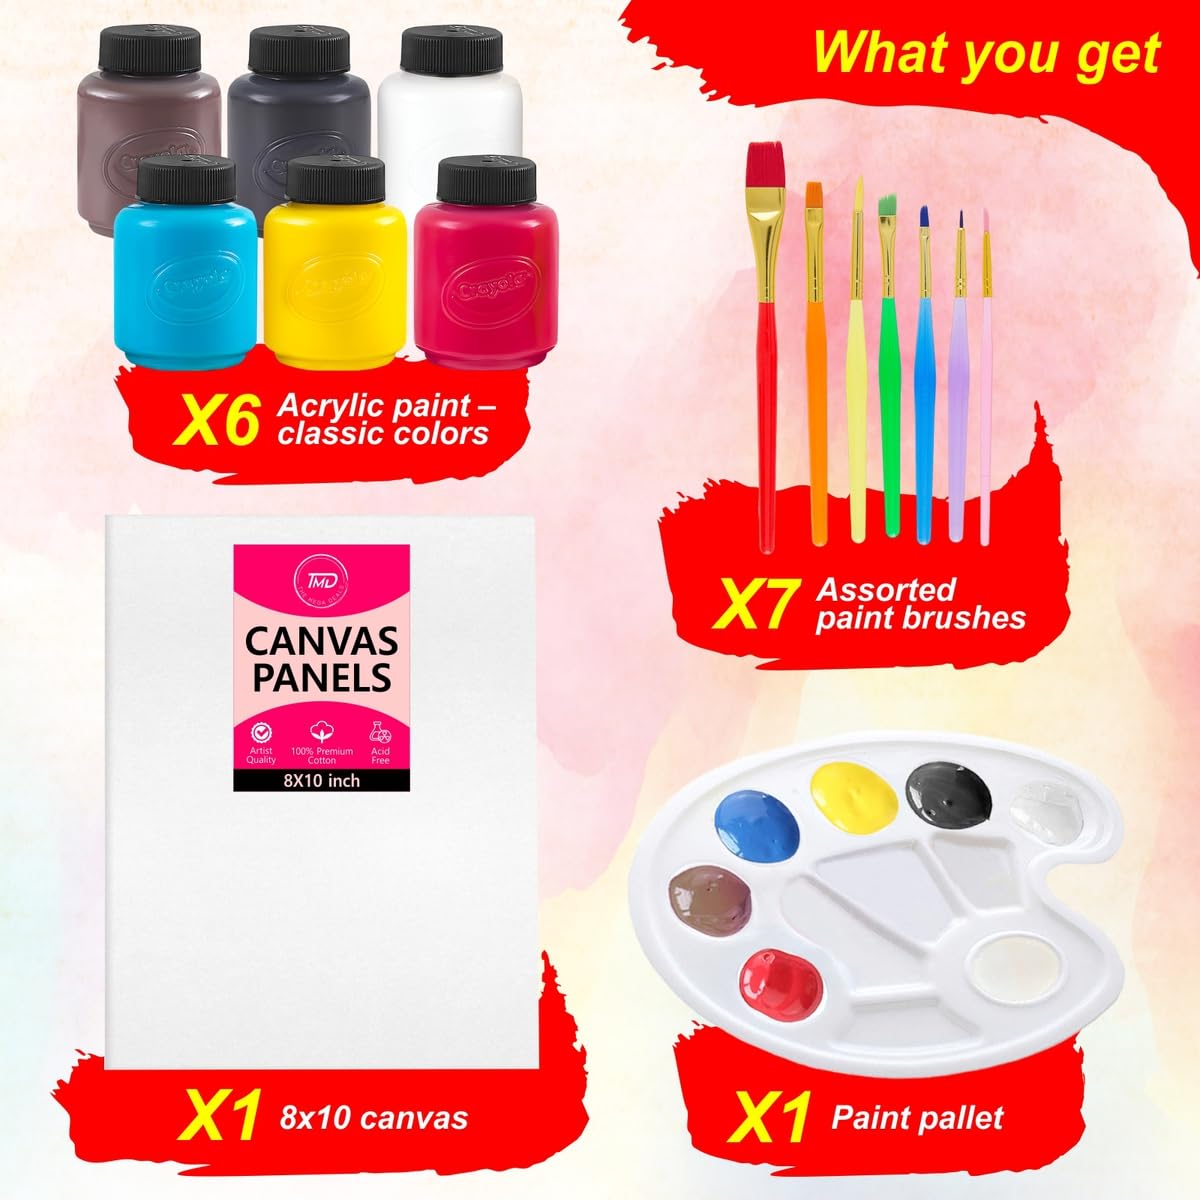 Acrylic Paint Set for Kids - Acrylic Paint Kit Includes 6 Assorted Craft Paint, Painting Canvas, 7 Paintbrushes, Paint Pallet - Arts and Crafts